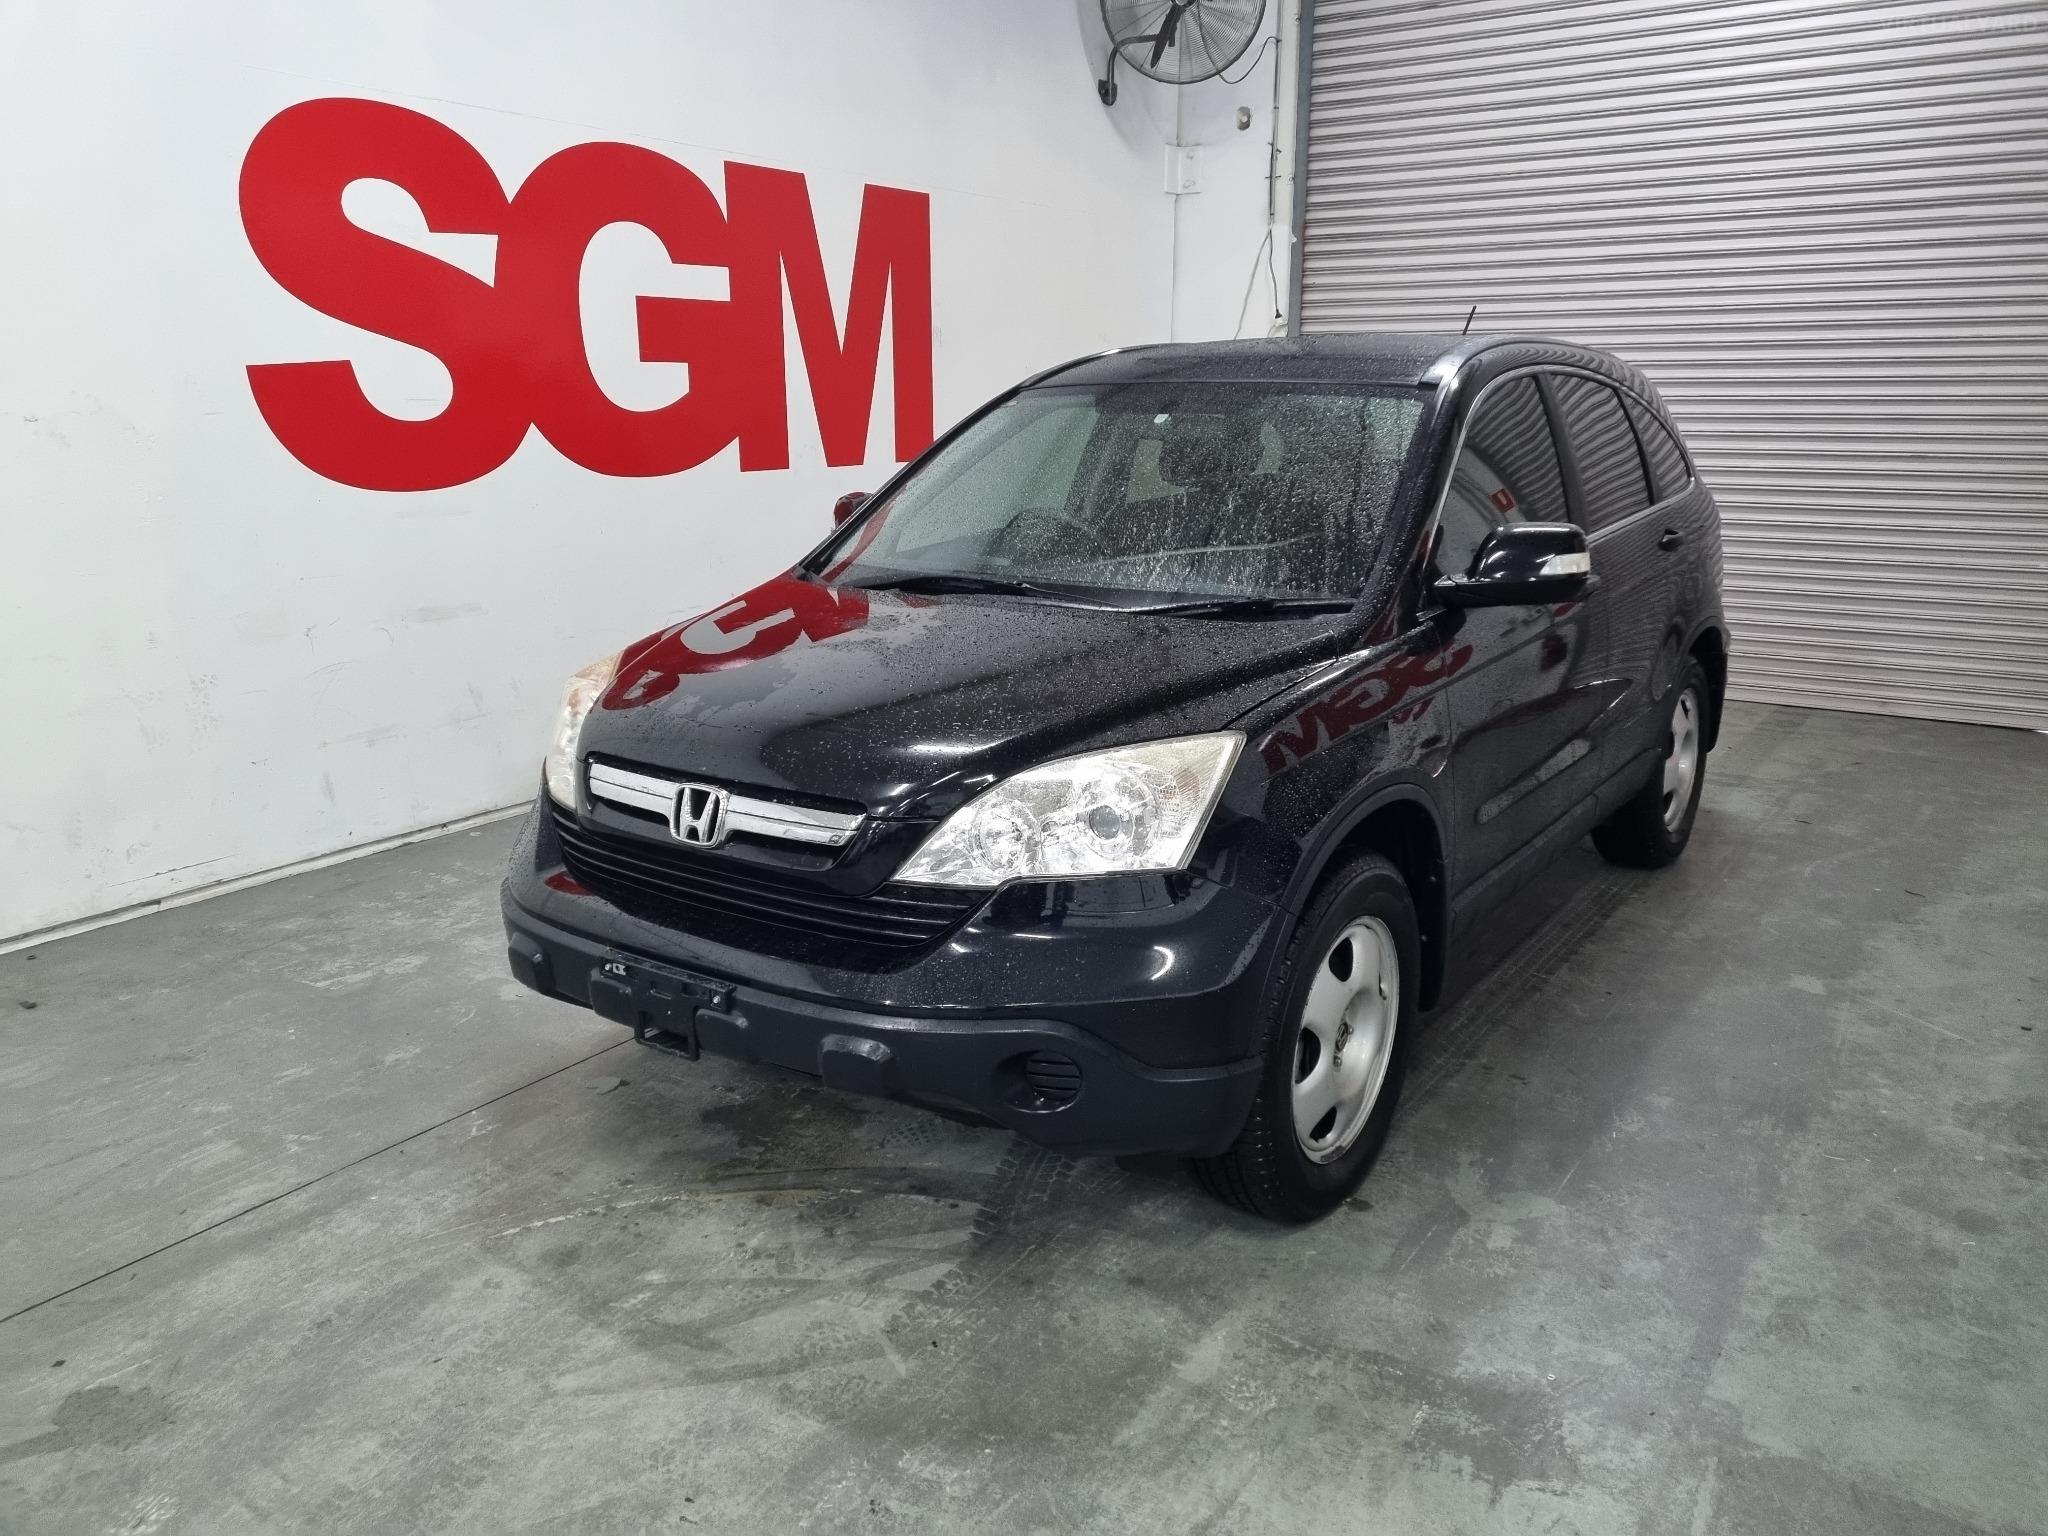 2008 Honda CR-V RE MY2007 Wagon 4dr Man 6sp 4x4 2.4i Picture 8